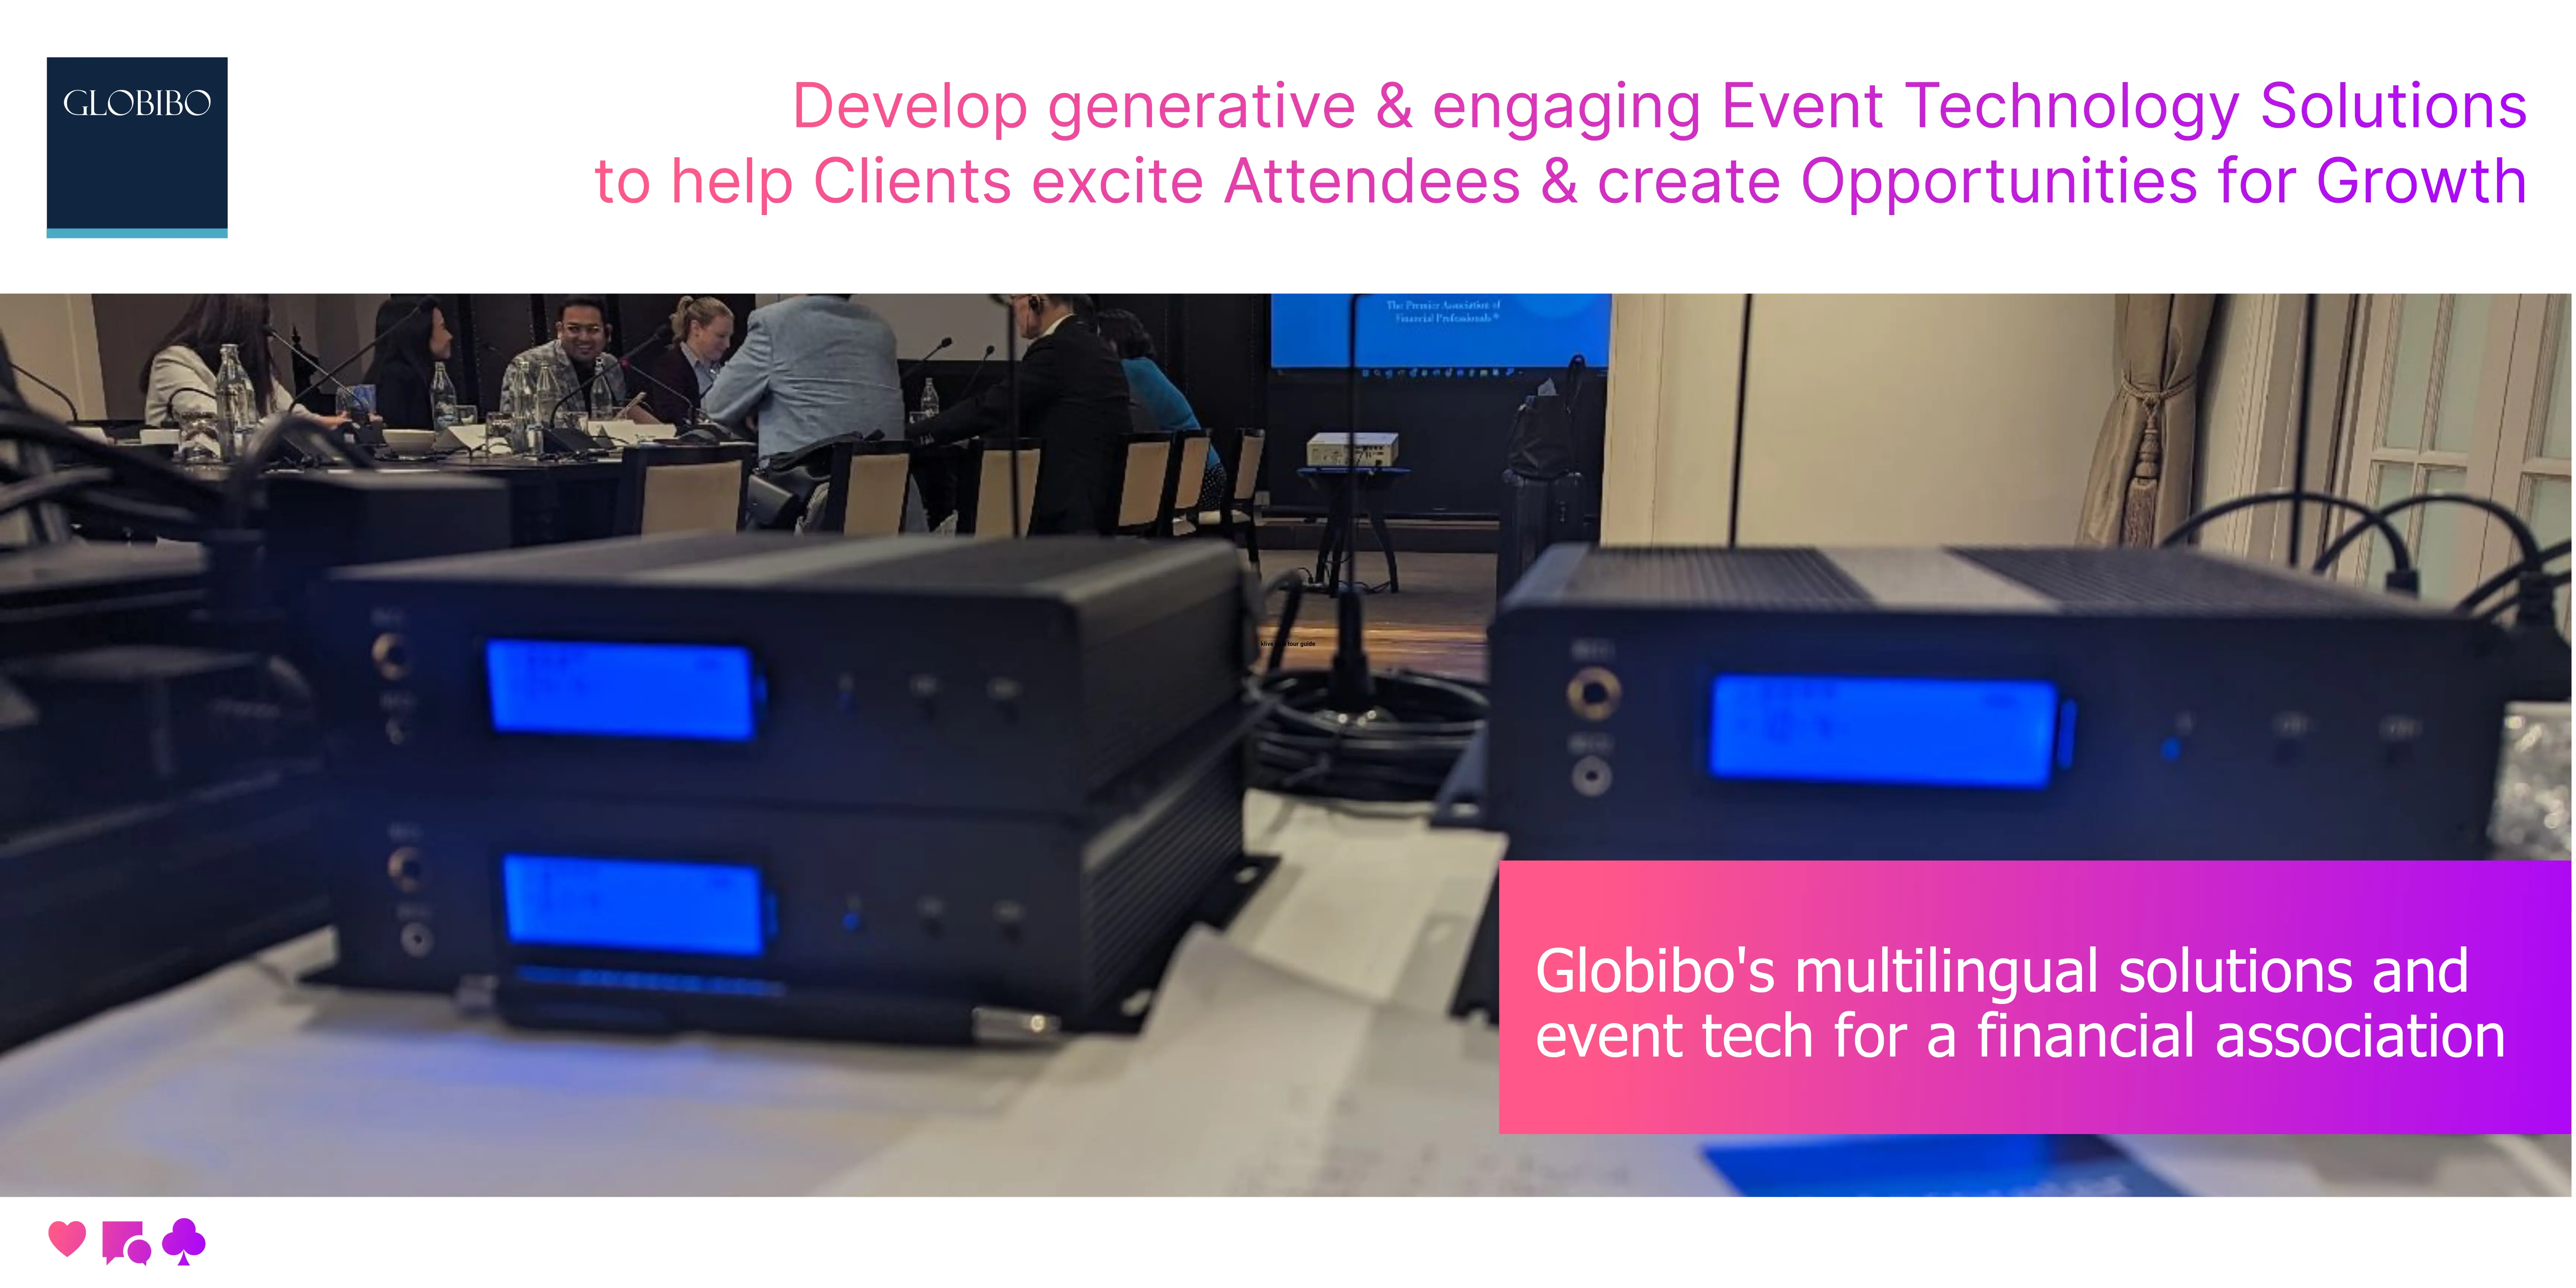 Globibo’s multilingual solutions and Event Technology for financial association events